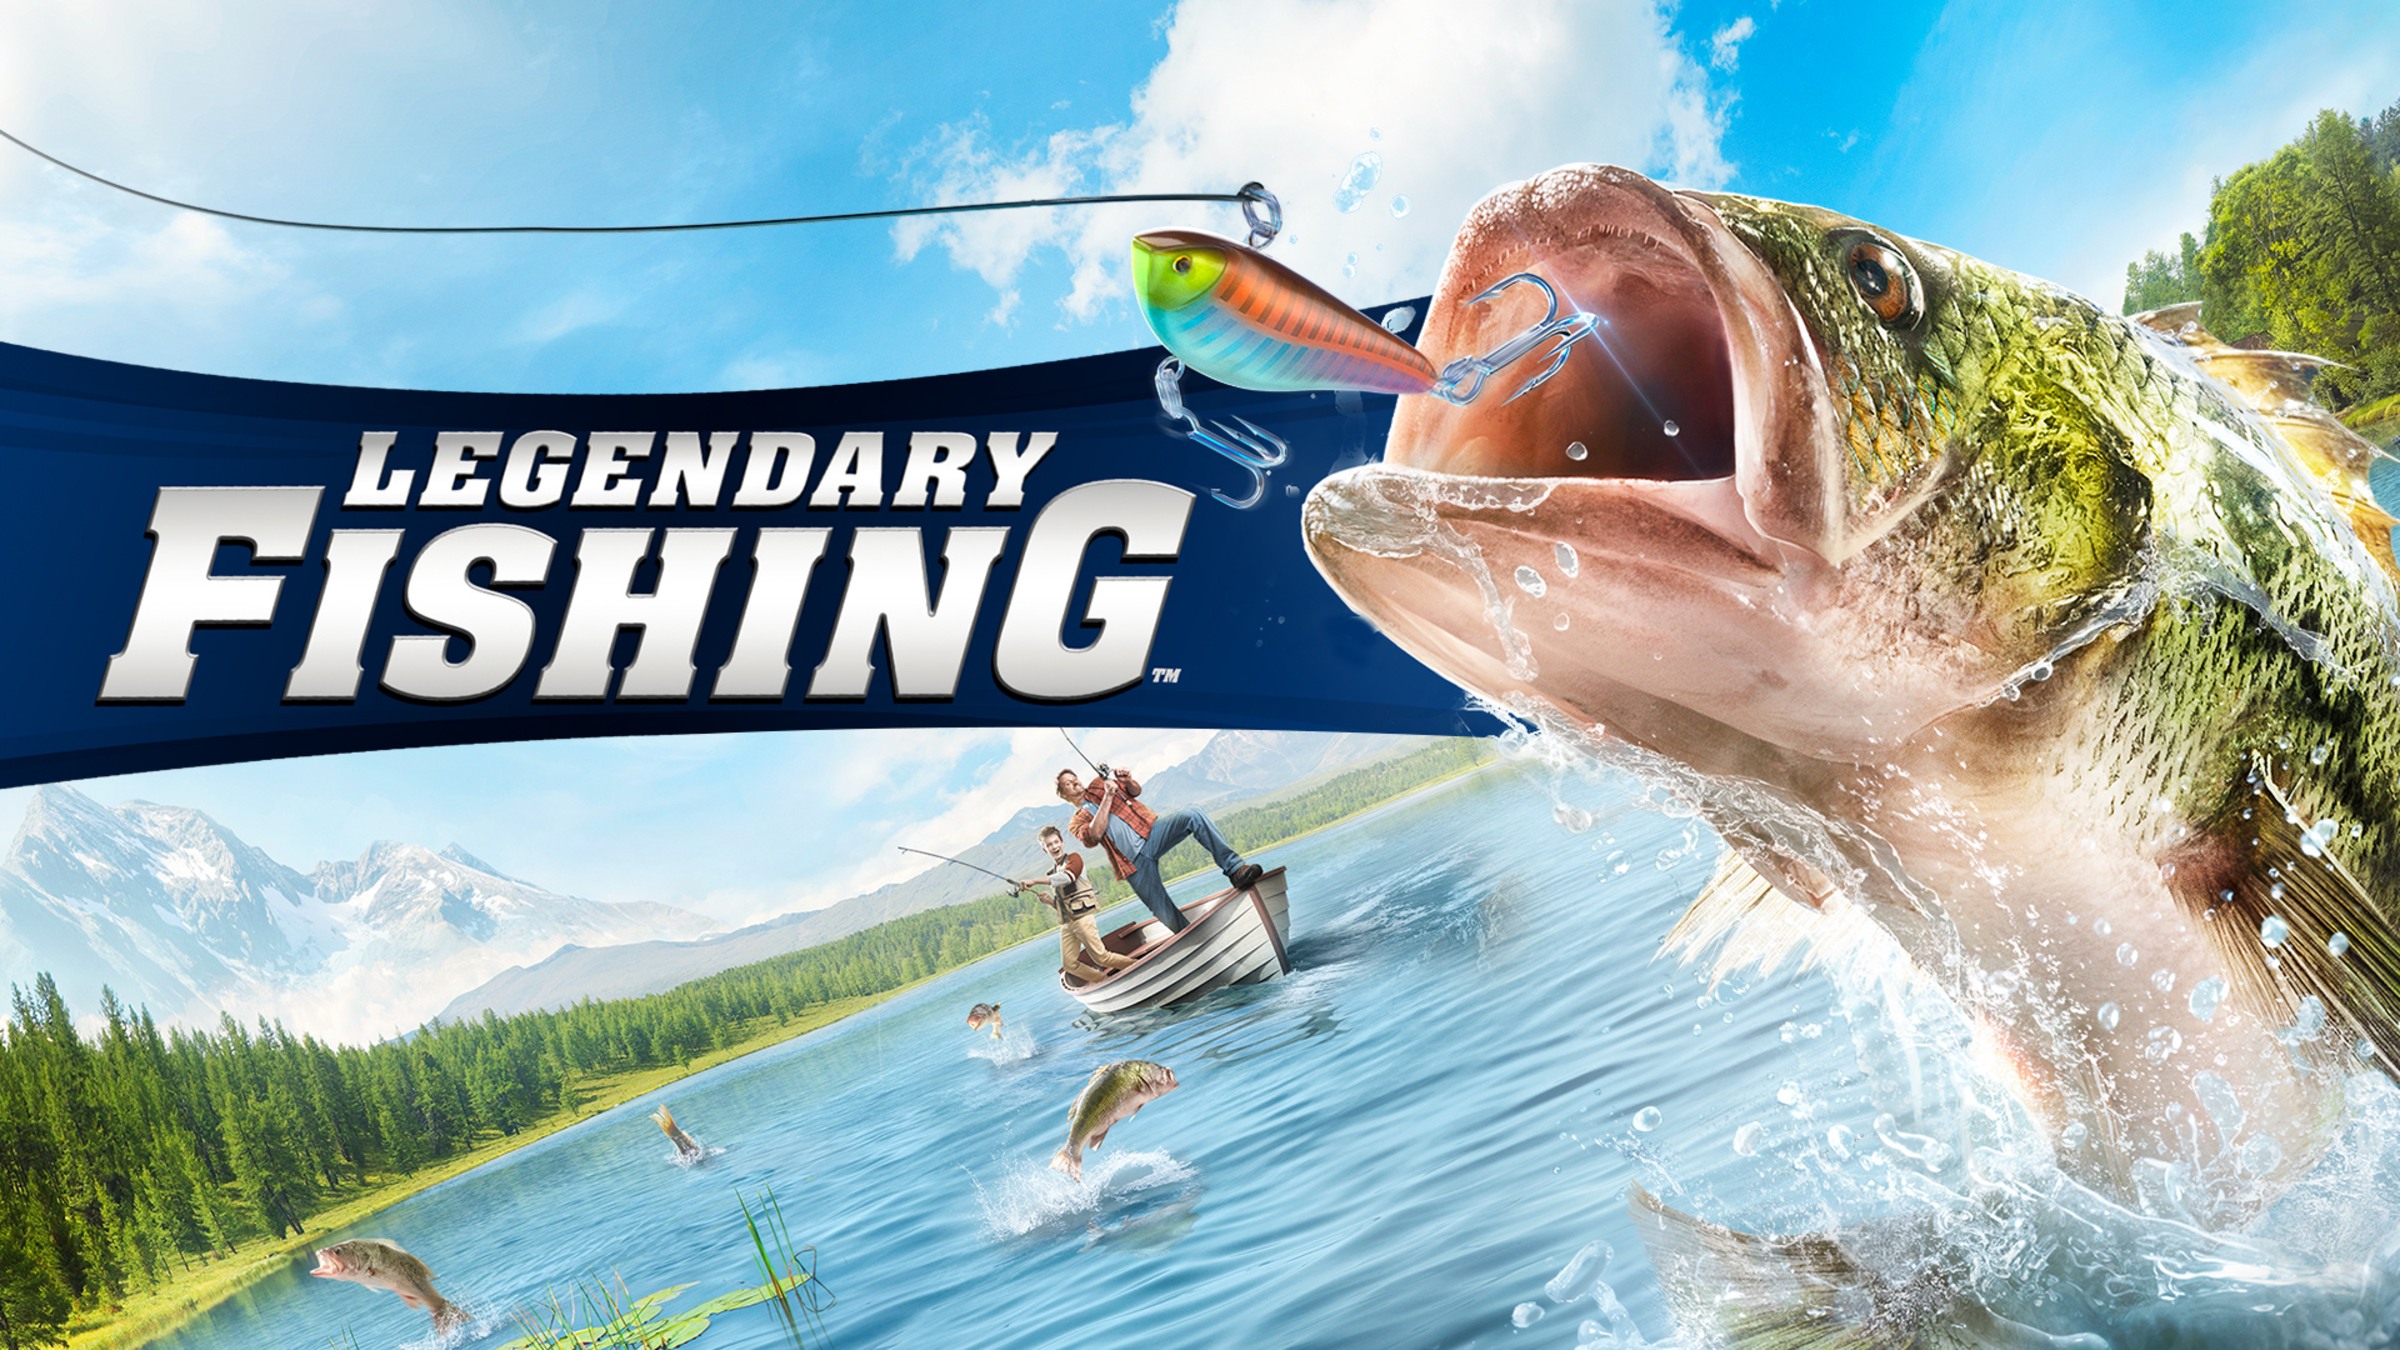 Legendary Fishing for Nintendo Switch - Nintendo Official Site for